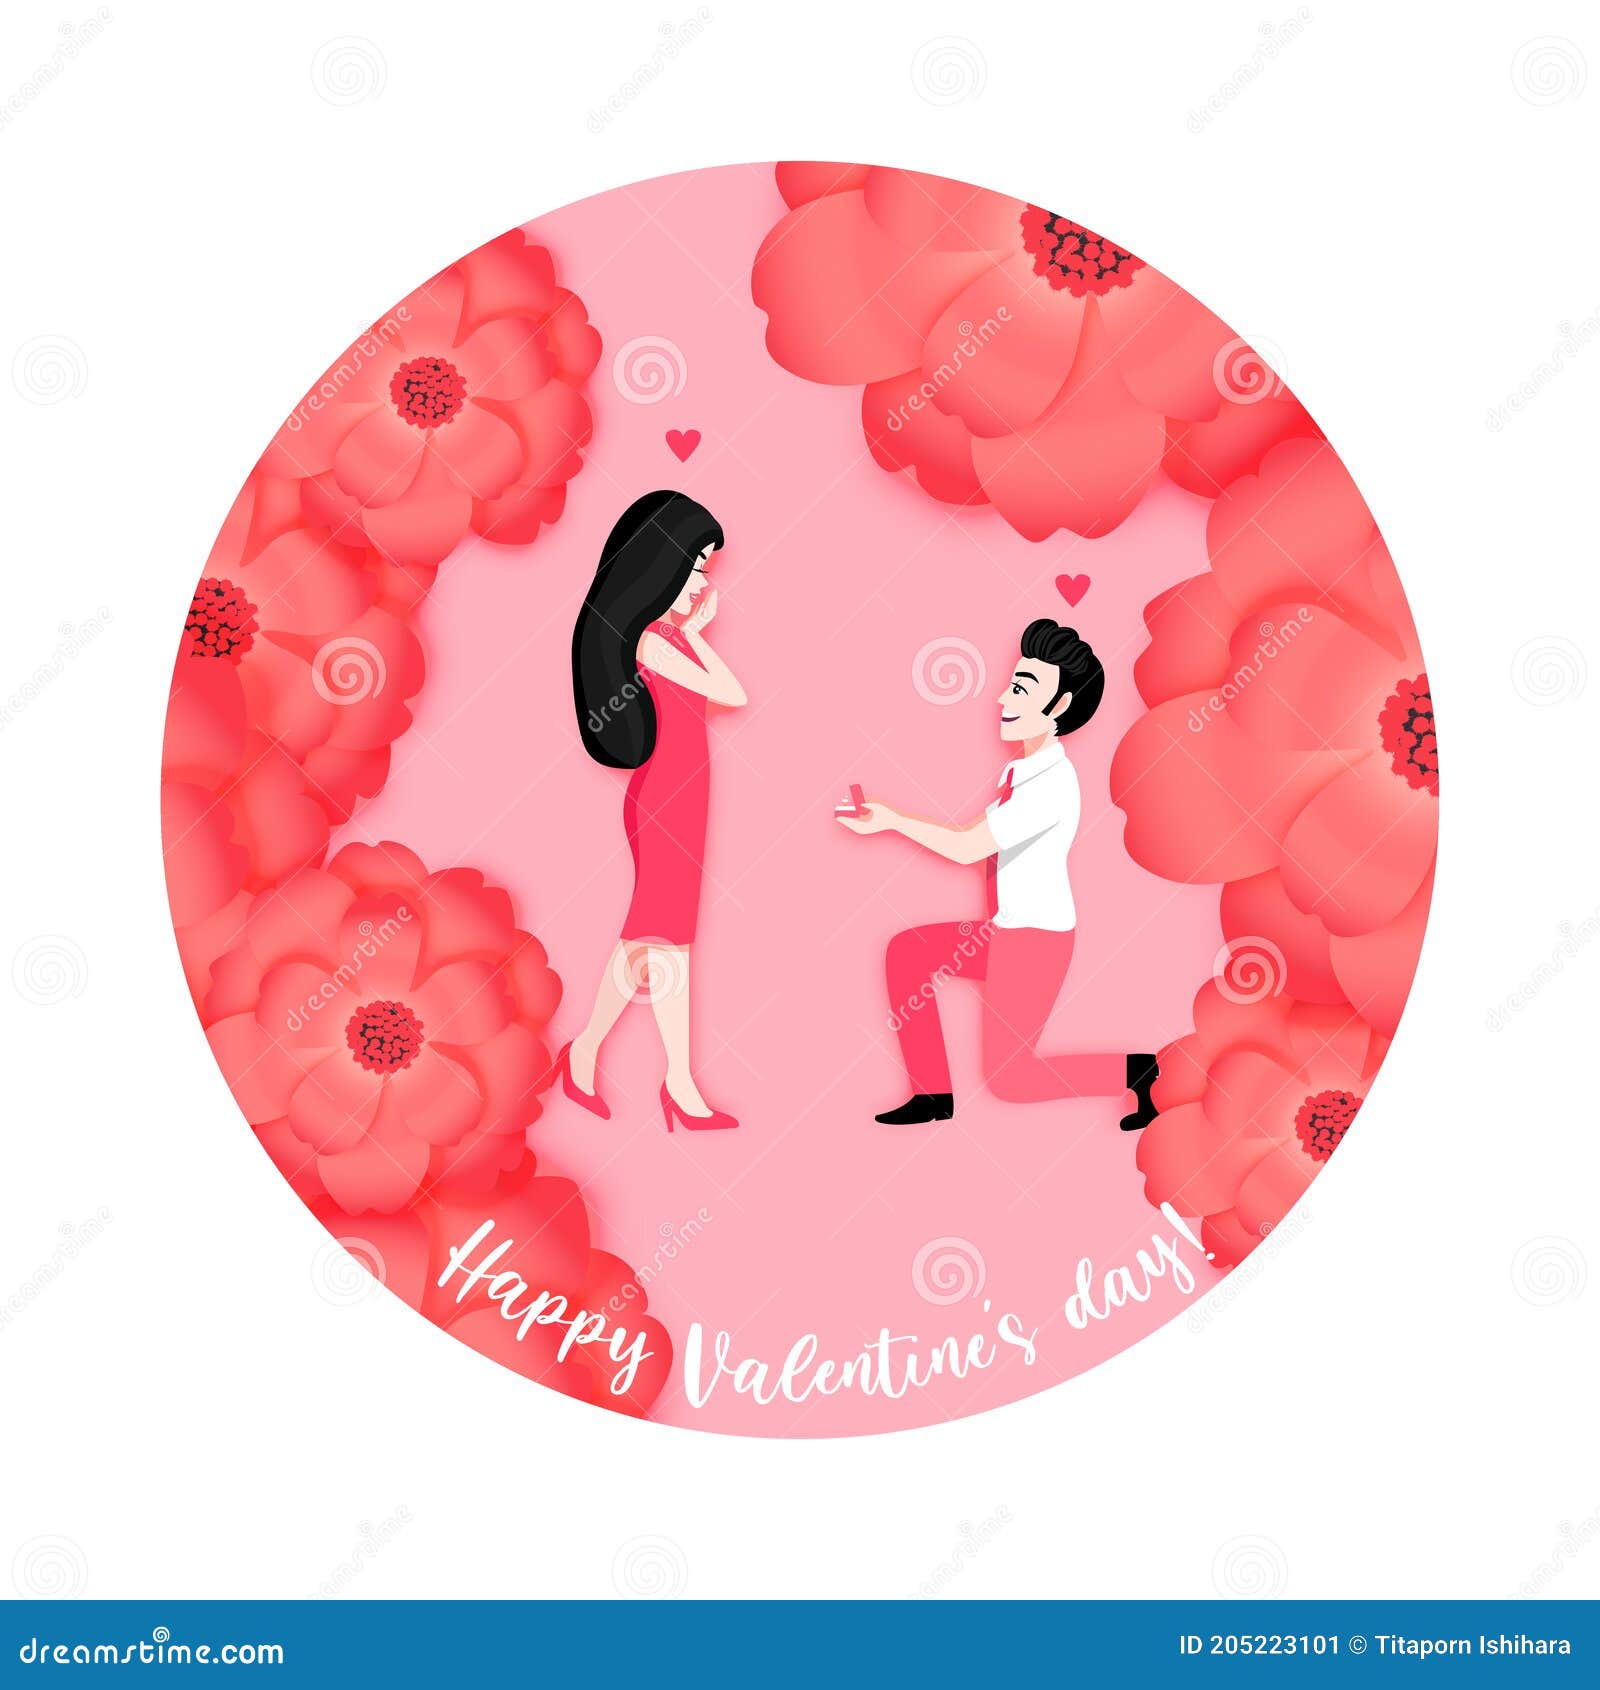 Cartoon Character with a Man Propose Marriage with Girlfriend on Flower  Background. Valentine S Day Festival Vector Stock Vector - Illustration of  girl, lover: 205223101